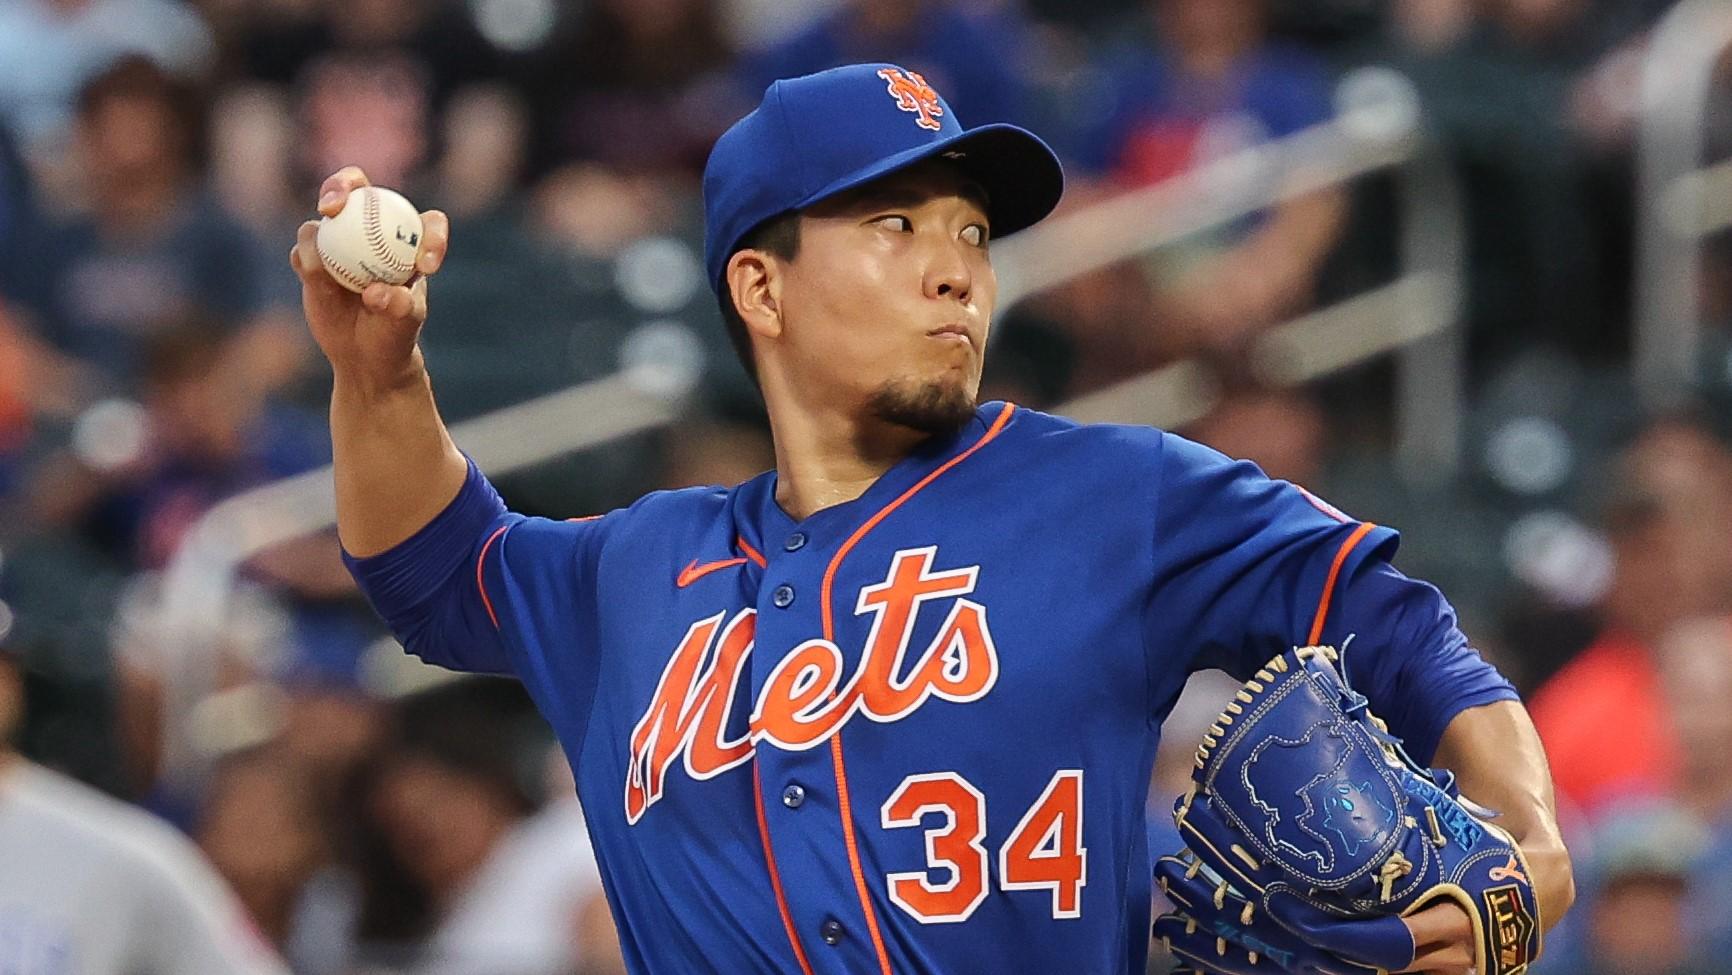 Aug 7, 2023; New York City, New York, USA; New York Mets starting pitcher Kodai Senga (34) delivers a pitch during the first inning against the Chicago Cubs at Citi Field. Mandatory Credit: Vincent Carchietta-USA TODAY Sports